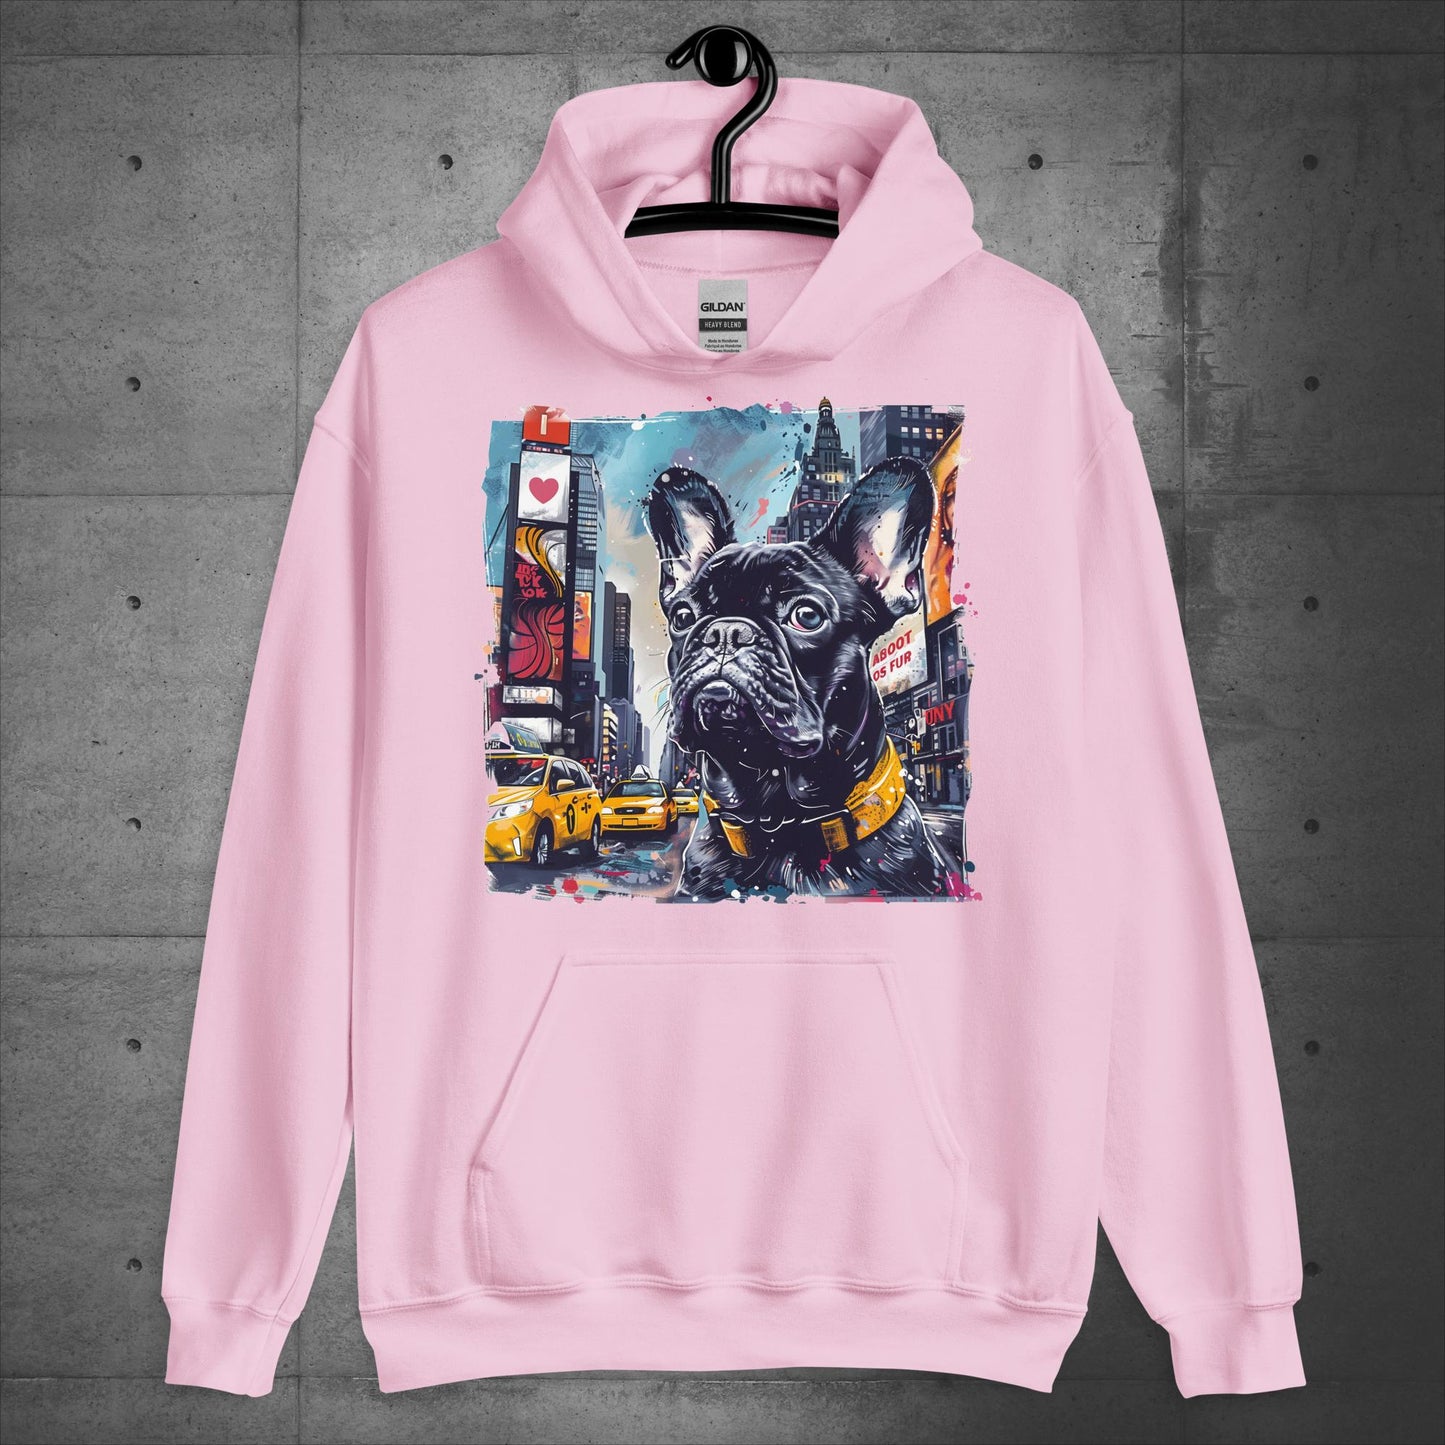 Lively Times Square Frenchie - Unisex Hoodie